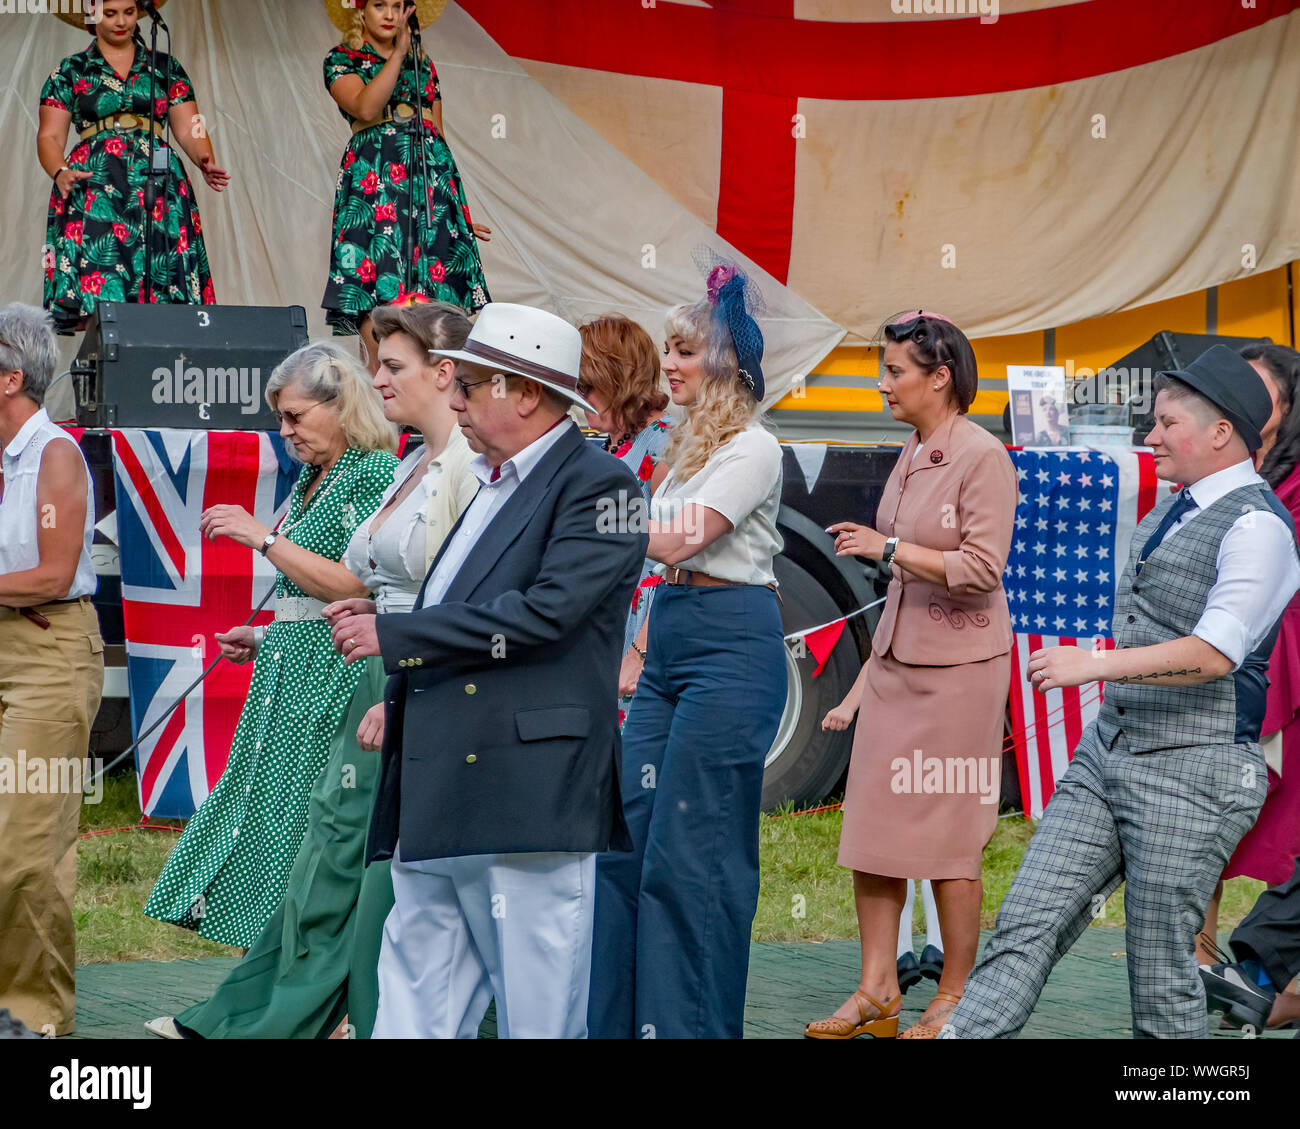 Dance troupe dressed up in 1940s style clothing performs a Charleston dance demonstration at the annual forties weekend in Holt Norfolk Stock Photo